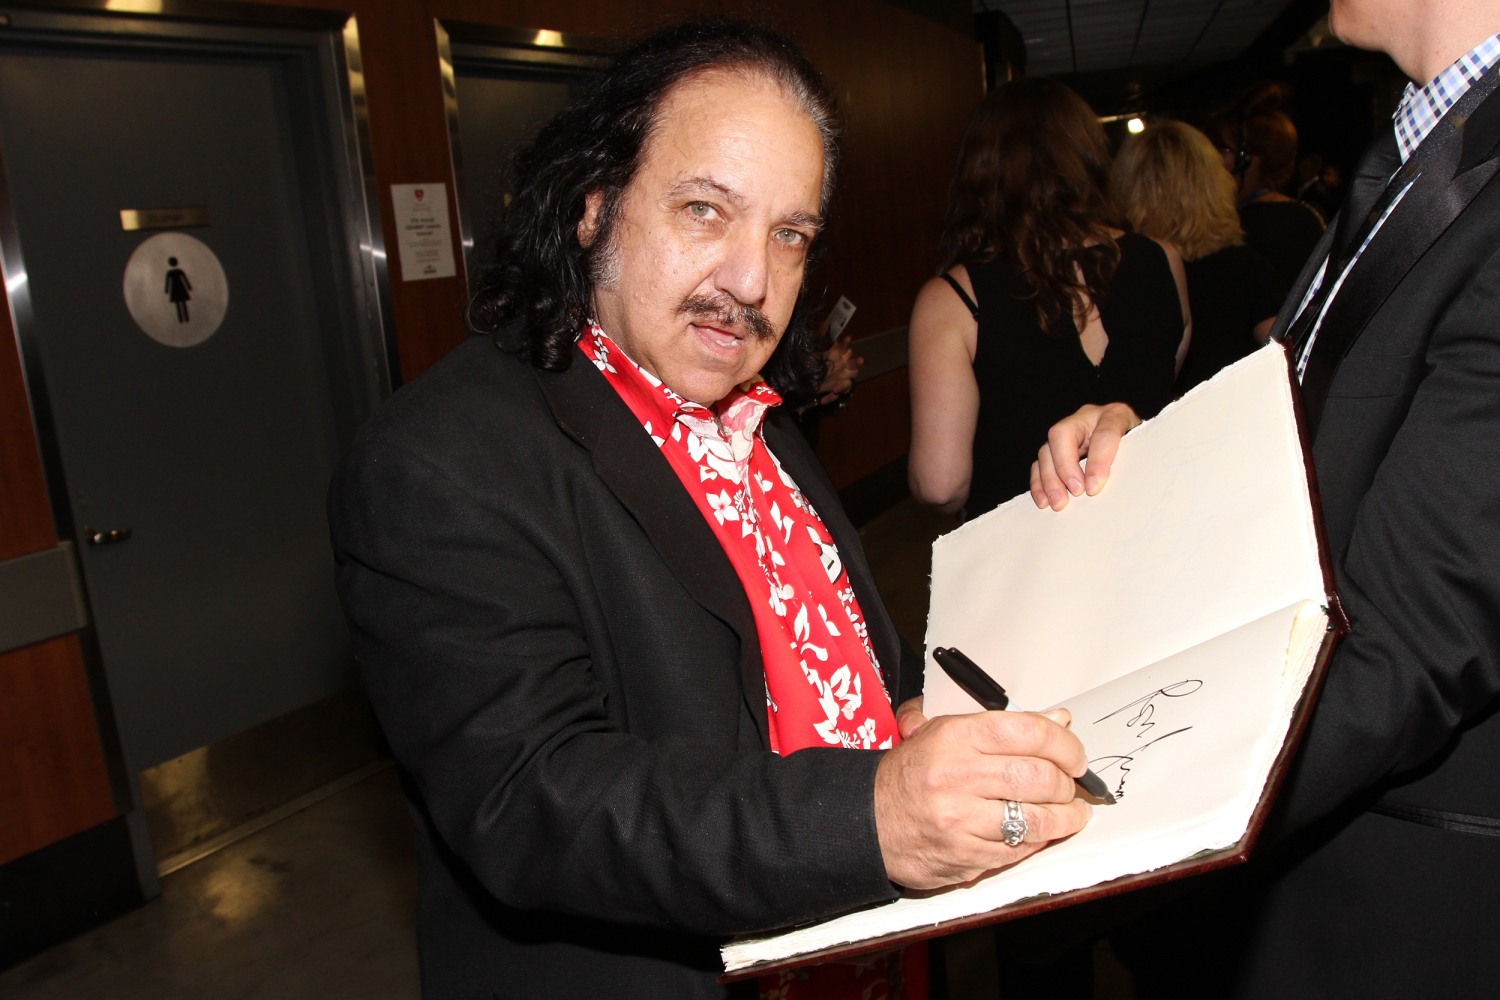 X Rape Video - Porn actor Ron Jeremy charged with rape, sexual assault